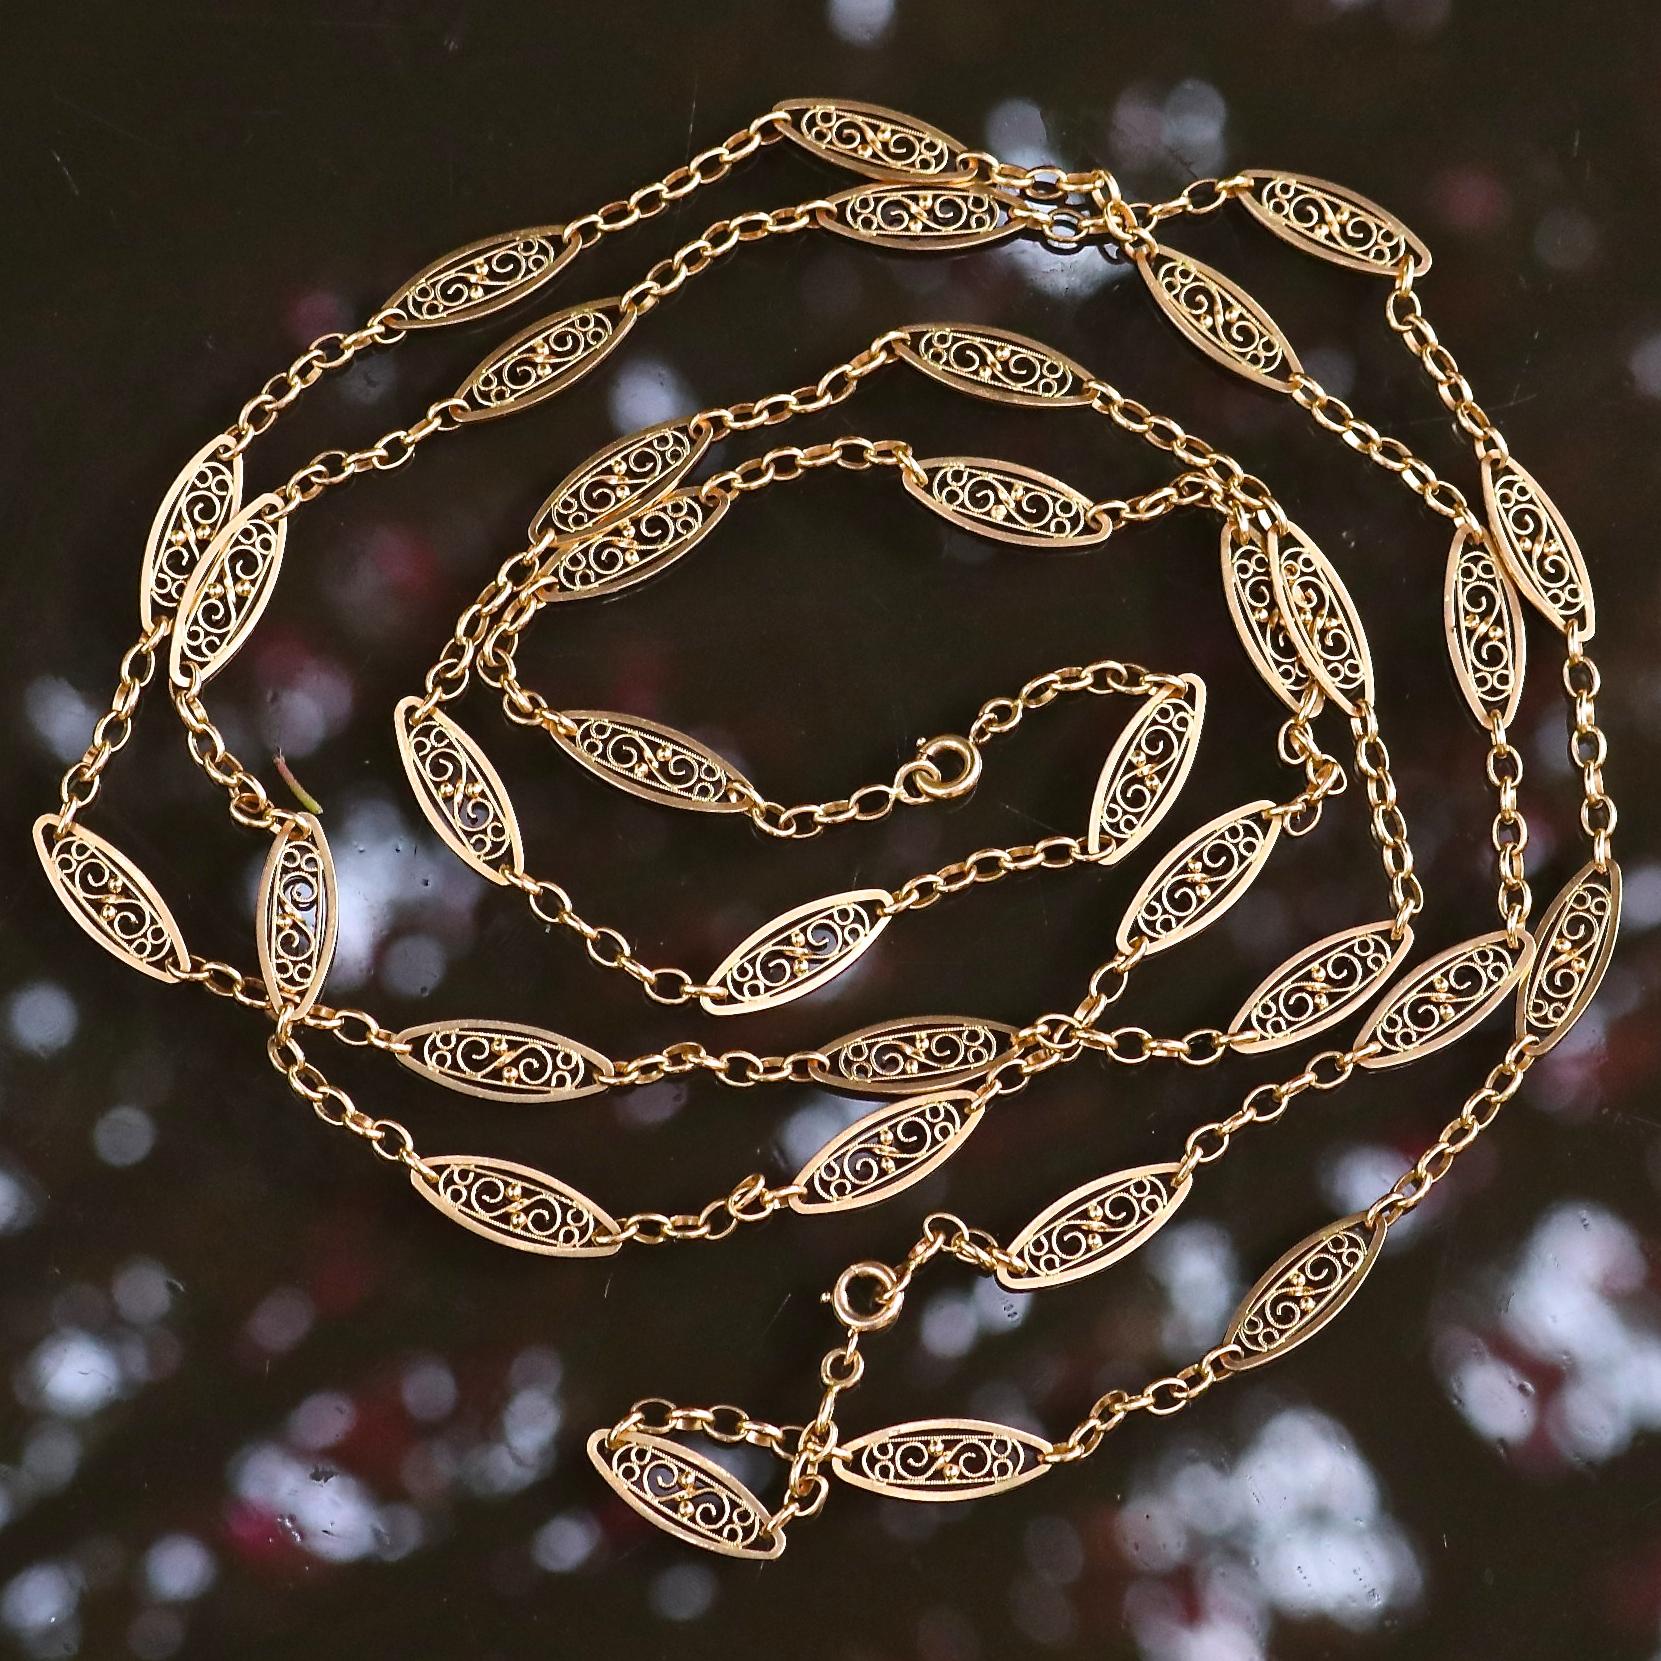 Found on an extensive trip through Southern France, this Antique French 18k gold necklace is a one of a kind find. At 55 inches long, it can be worn long or wrapped several times for a luxurious layered look. Featuring elegant elongated oval